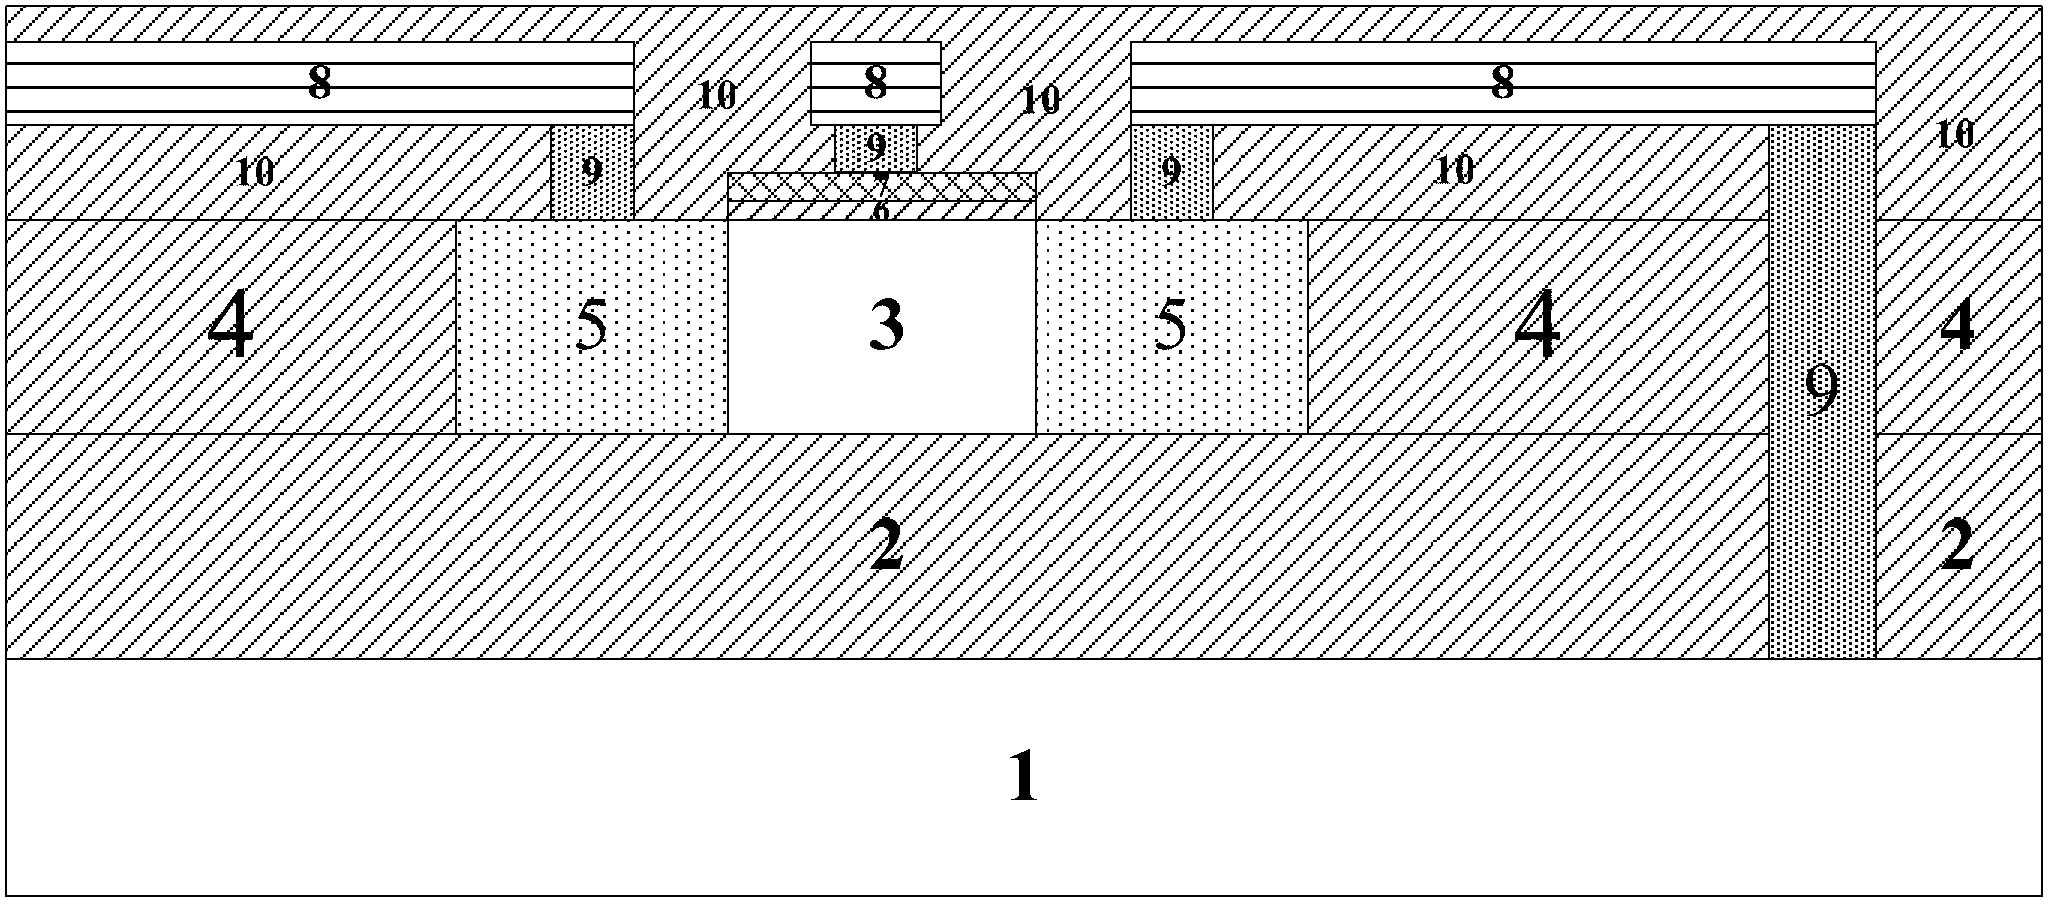 Silicon-on-insulator (SOI)/metal oxide semiconductor (MOS) device structure for connecting negative voltage on backgate through negative charge pump and manufacturing method